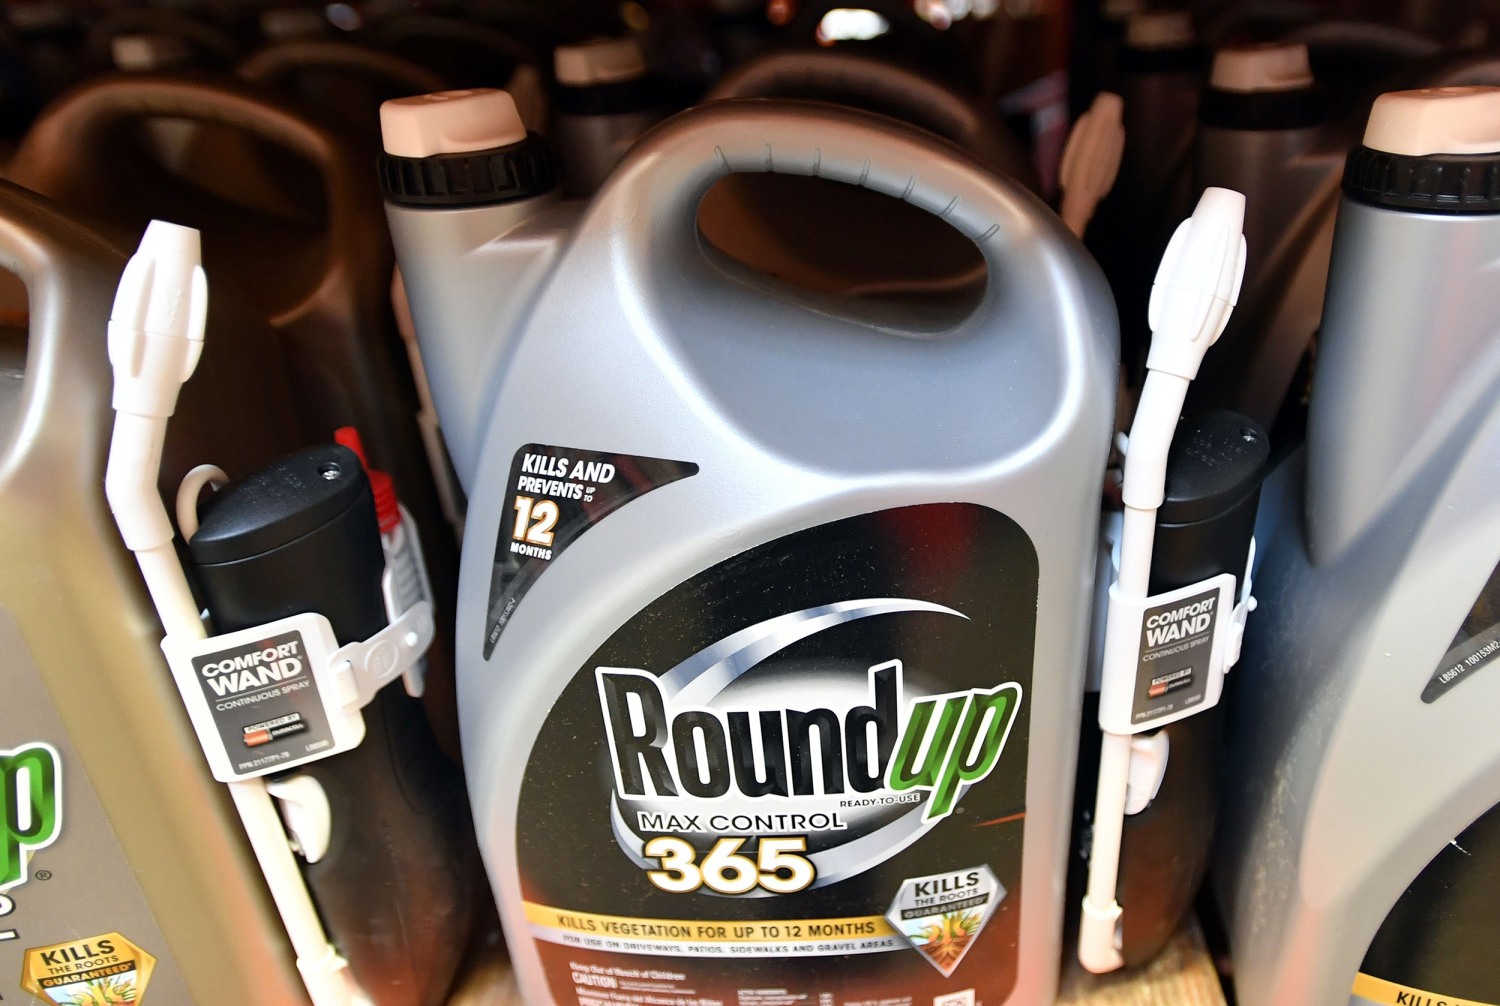 The Truth About Roundup and Glyphosate - That Every Gardener Should Know